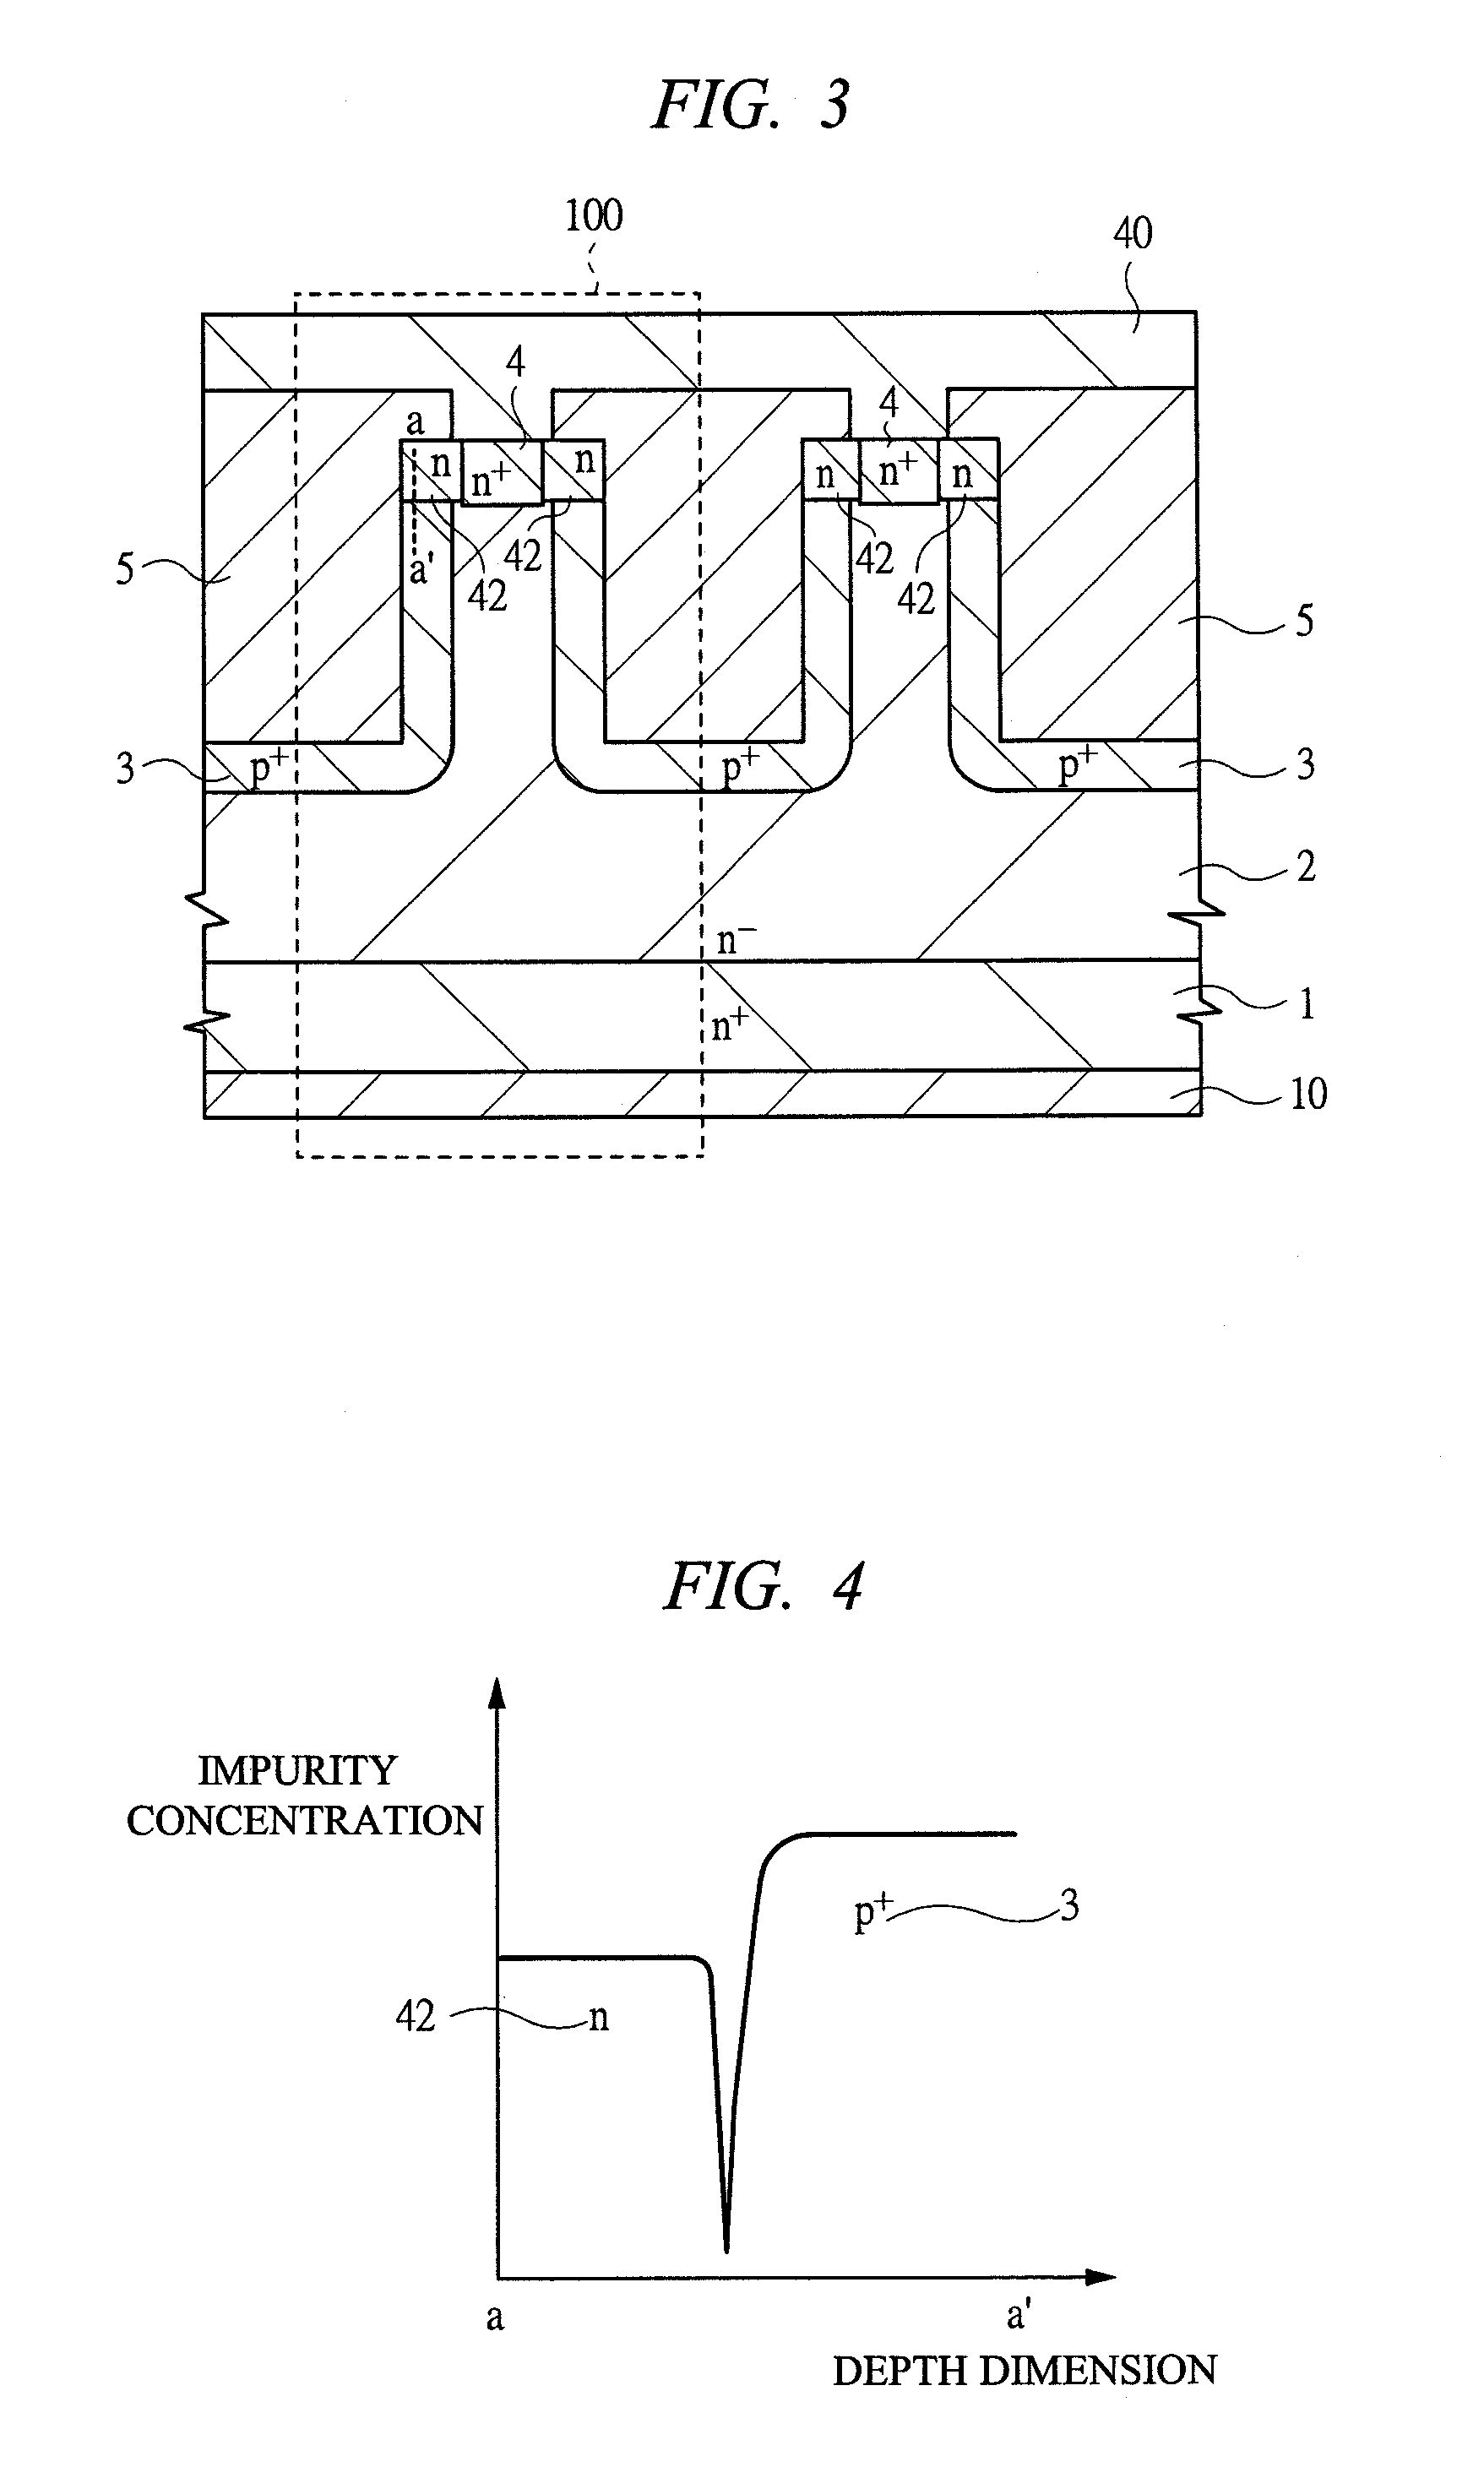 Switching semiconductor devices and fabrication process